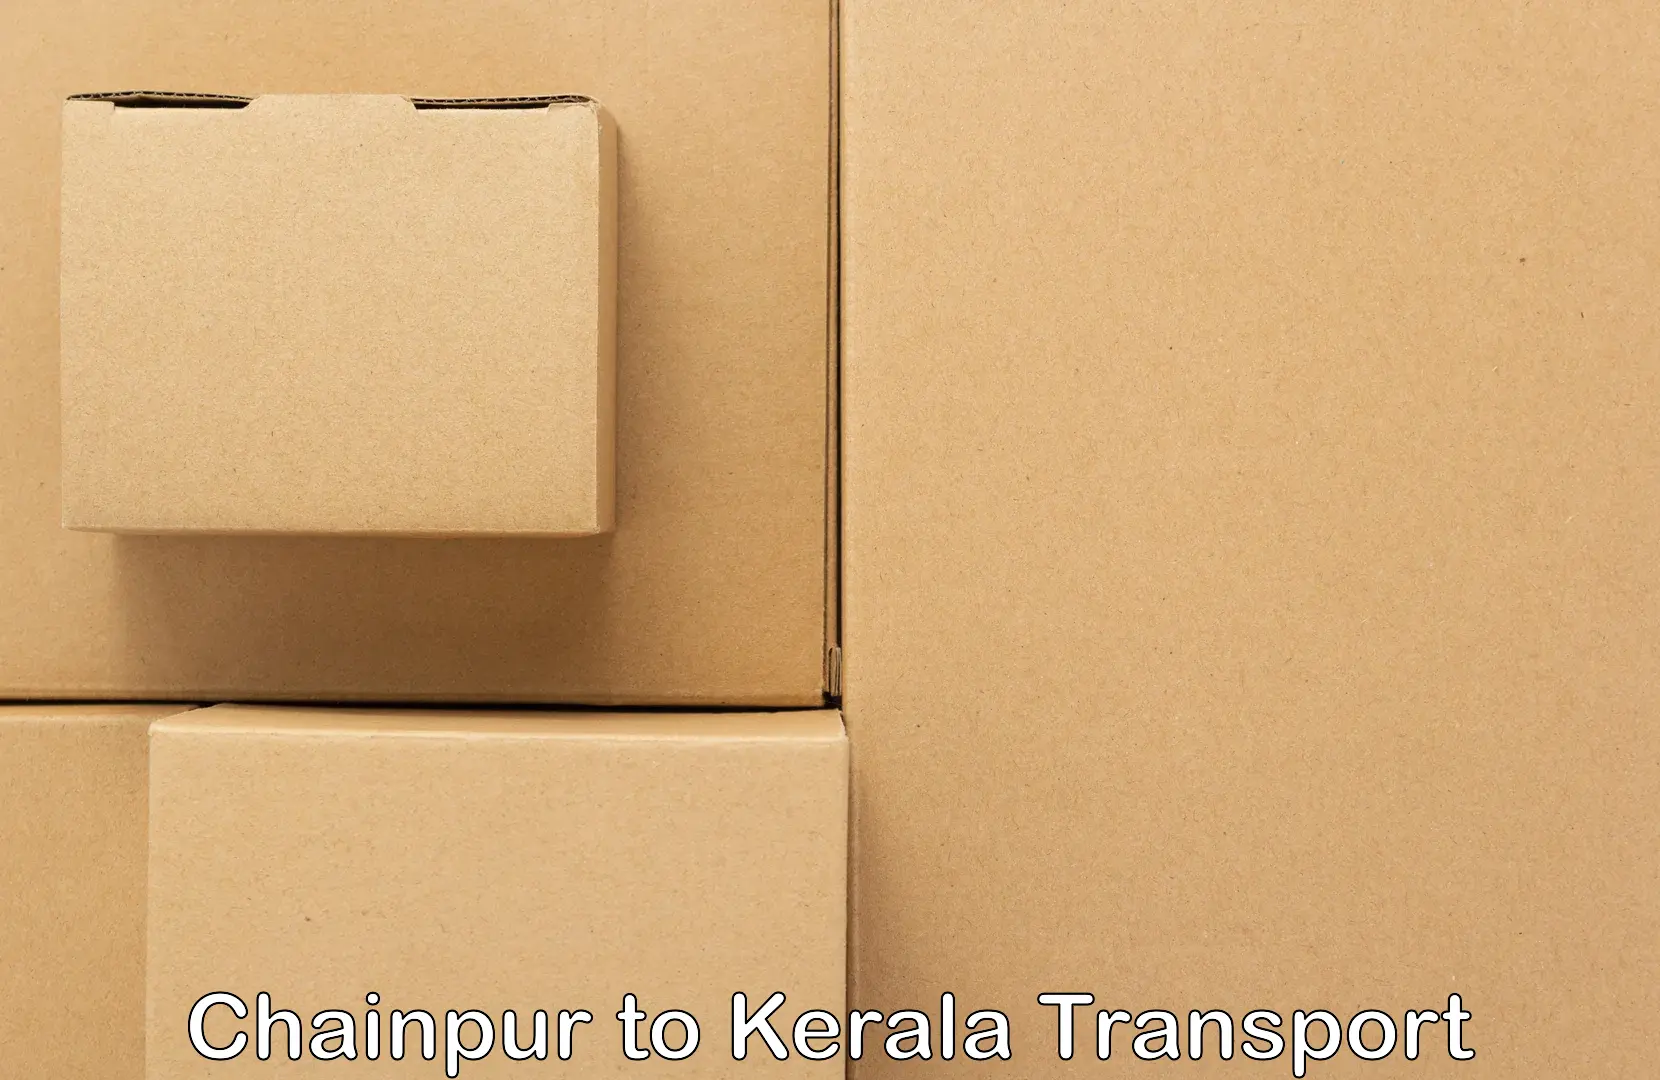 Container transport service Chainpur to Munnar